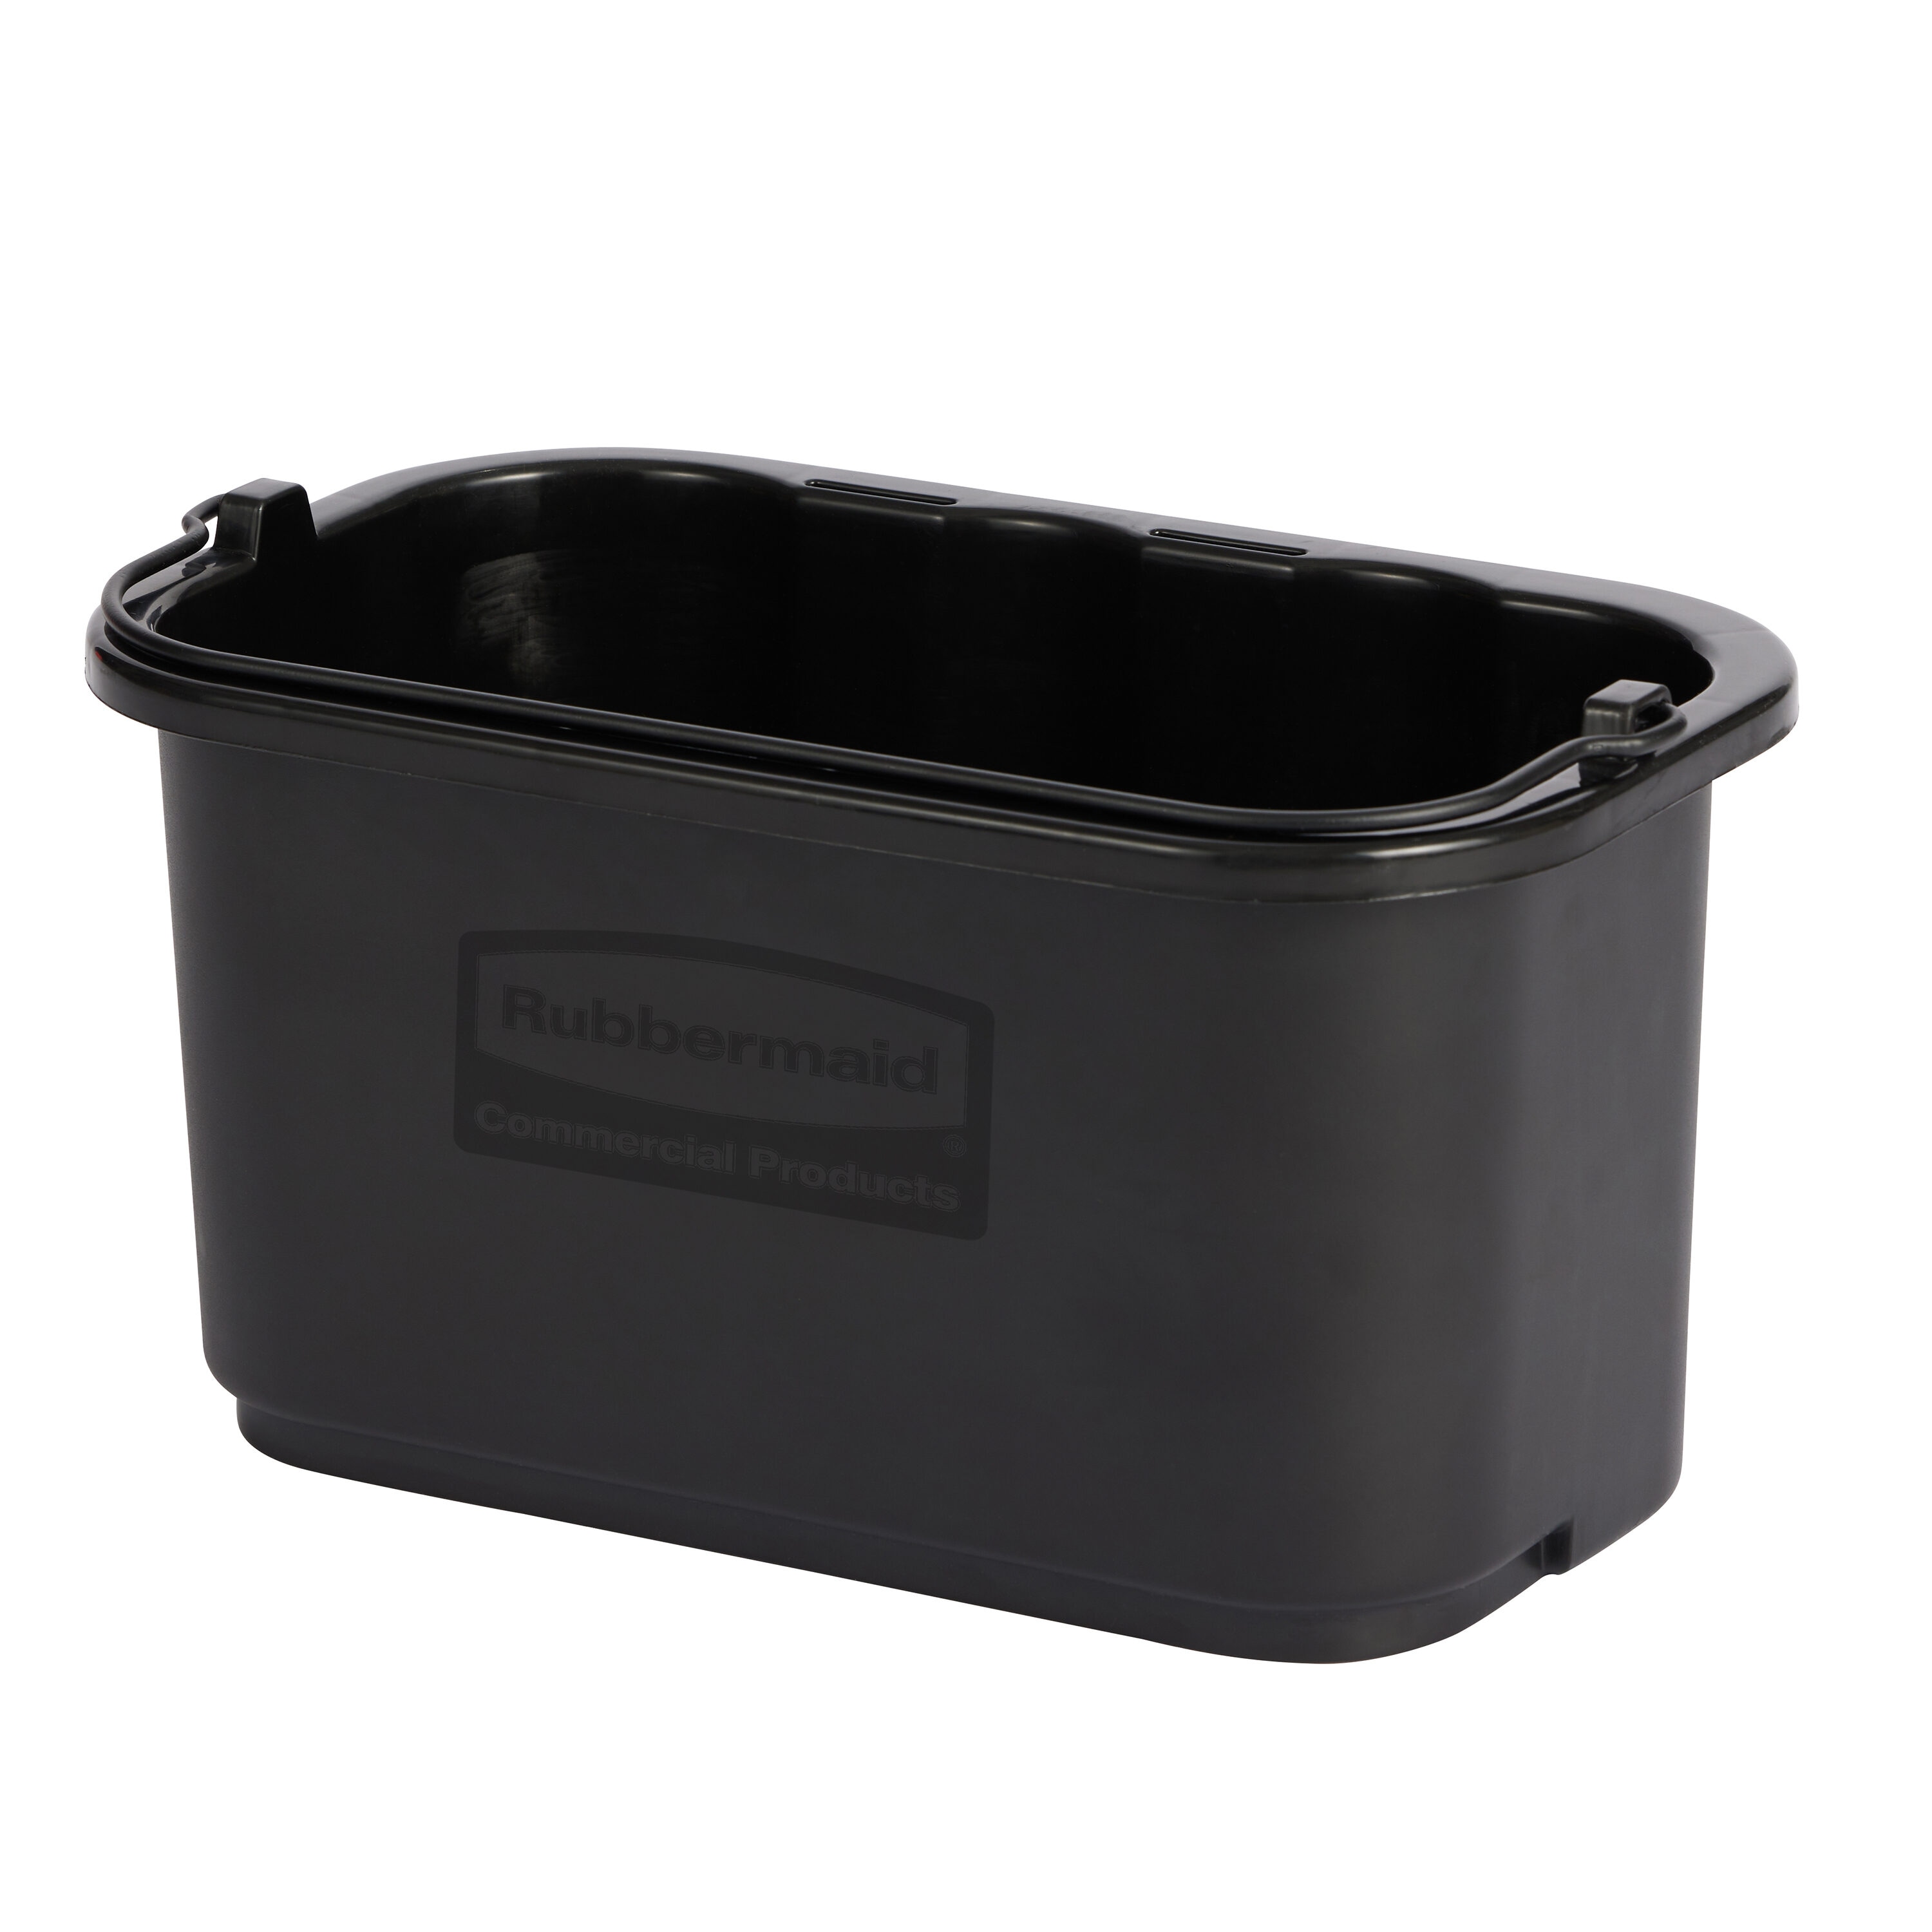 Rubbermaid Commercial Products Small Lid For 2, 4, 6, And 8 Qt